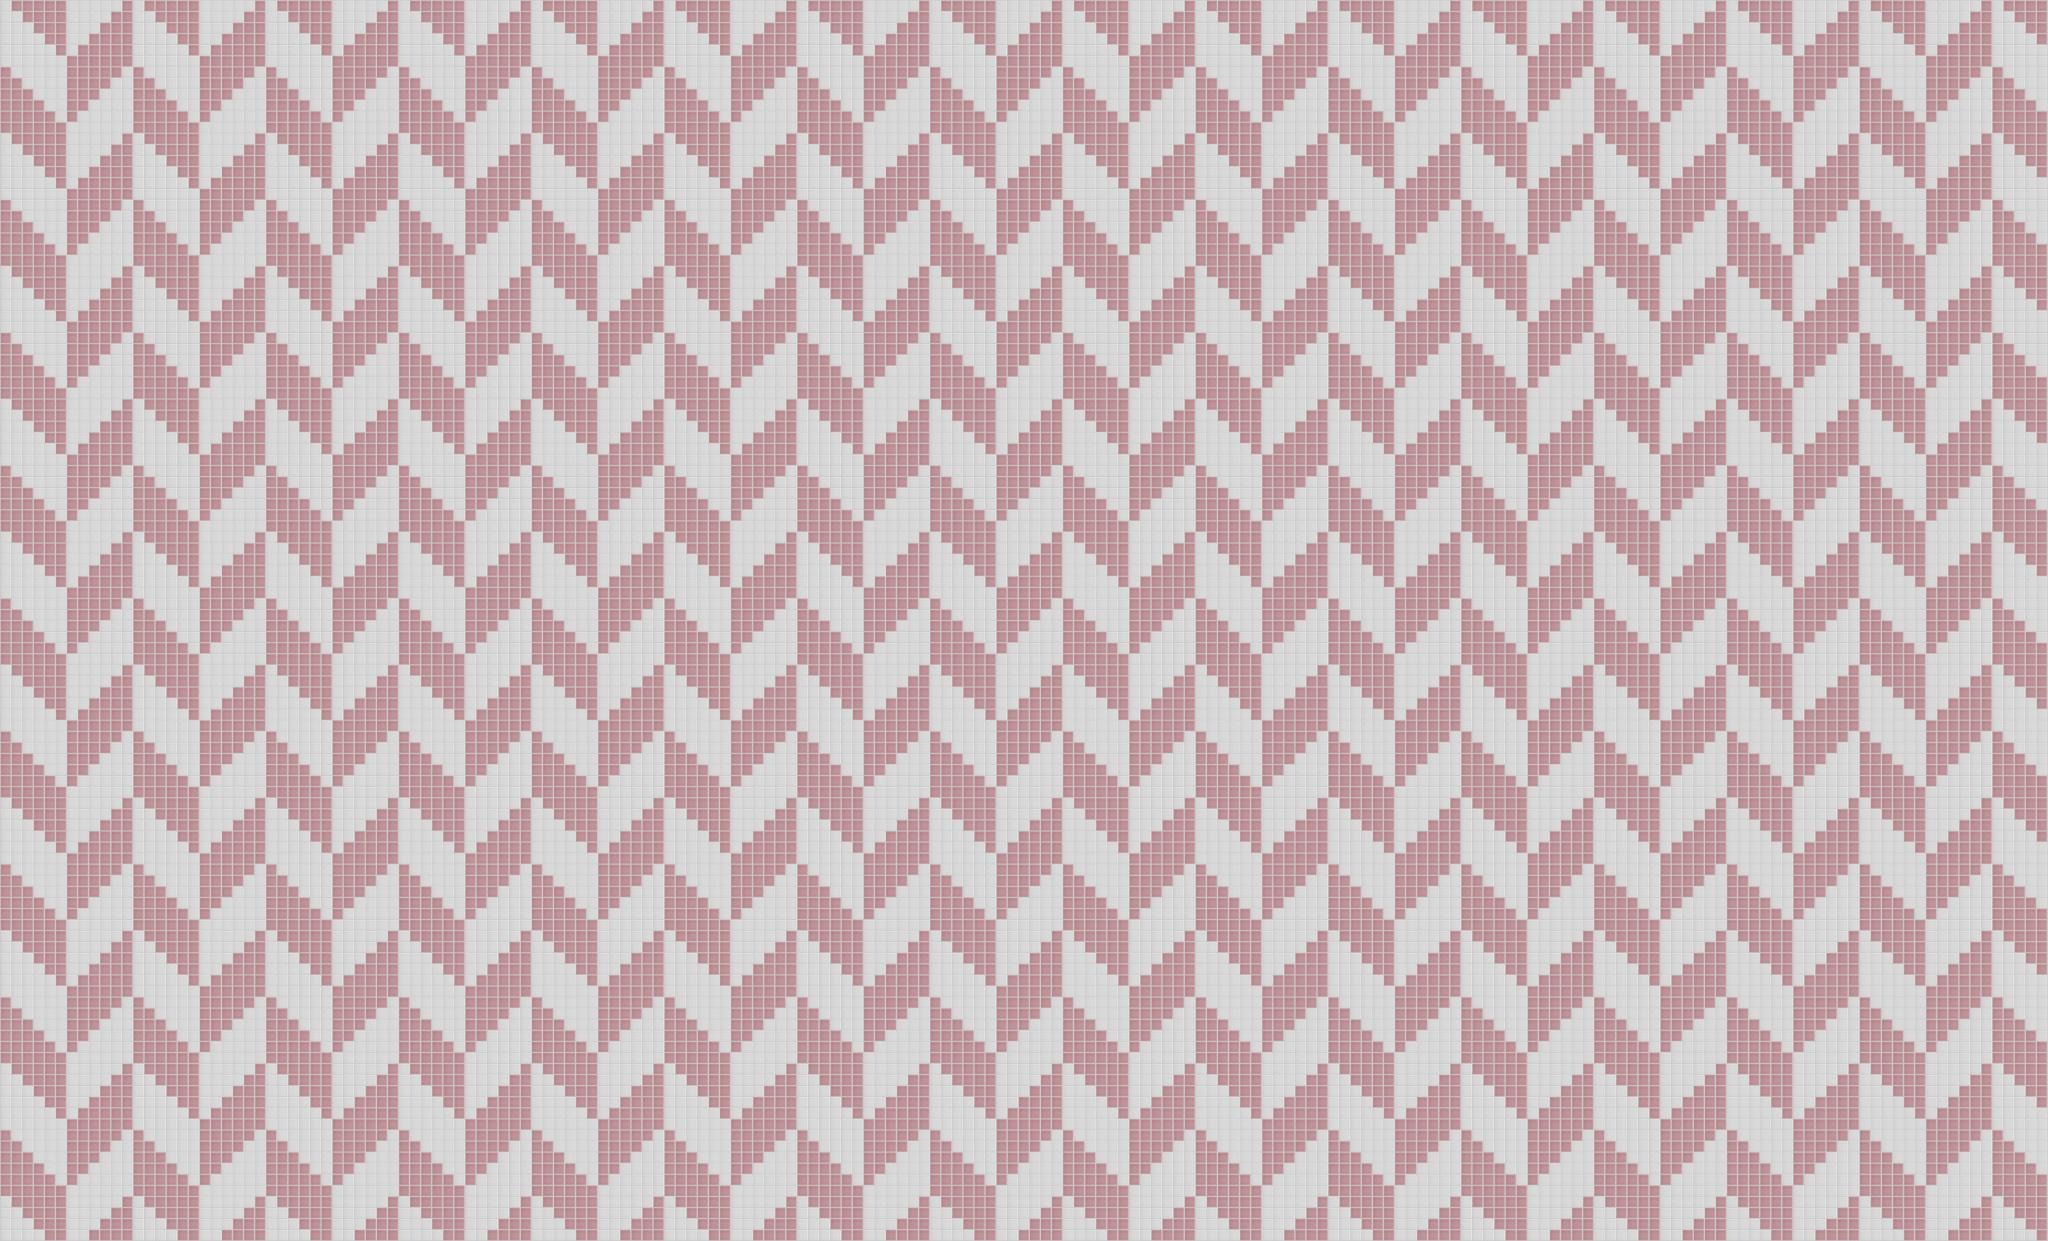 strawberry vector seamless pattern. red berry on a pink chevron background.  minimal elements decorative cute. sweet graphic of hand drawn illustration  for print, wallpaper, textile, wrapping. 5261575 Vector Art at Vecteezy